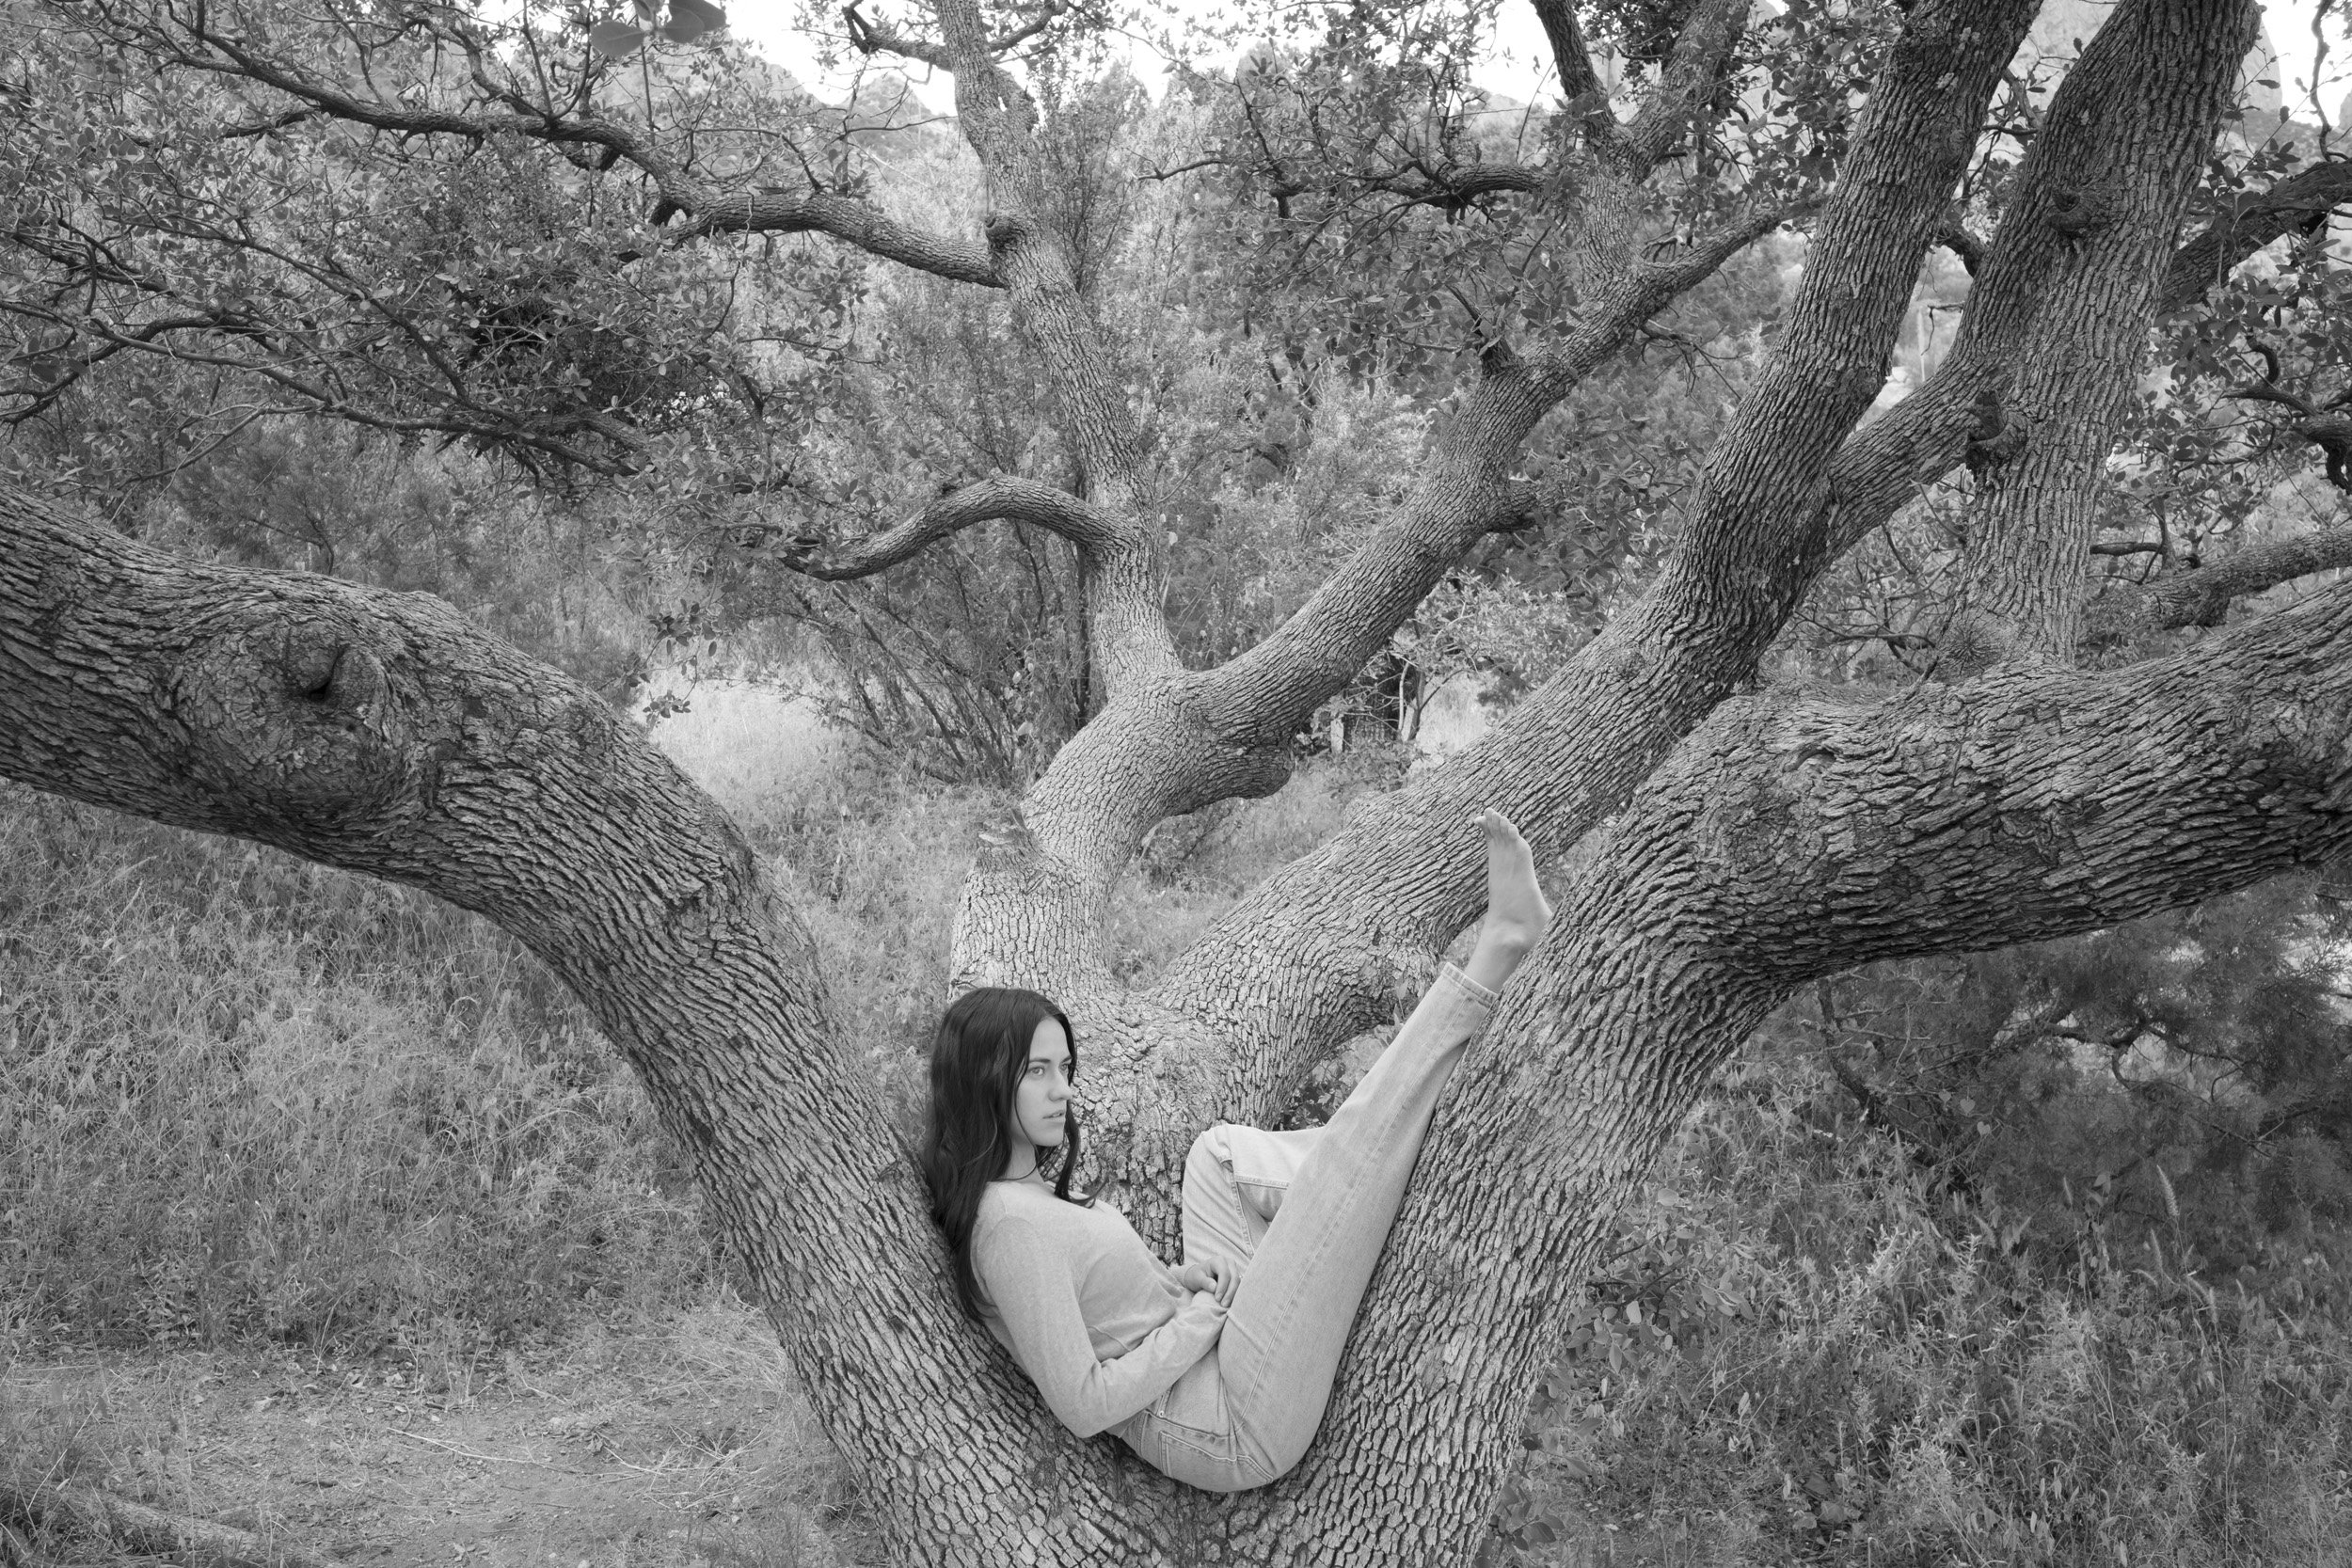 Andrea sitting in tree in New Mexico for Everlane.jpg